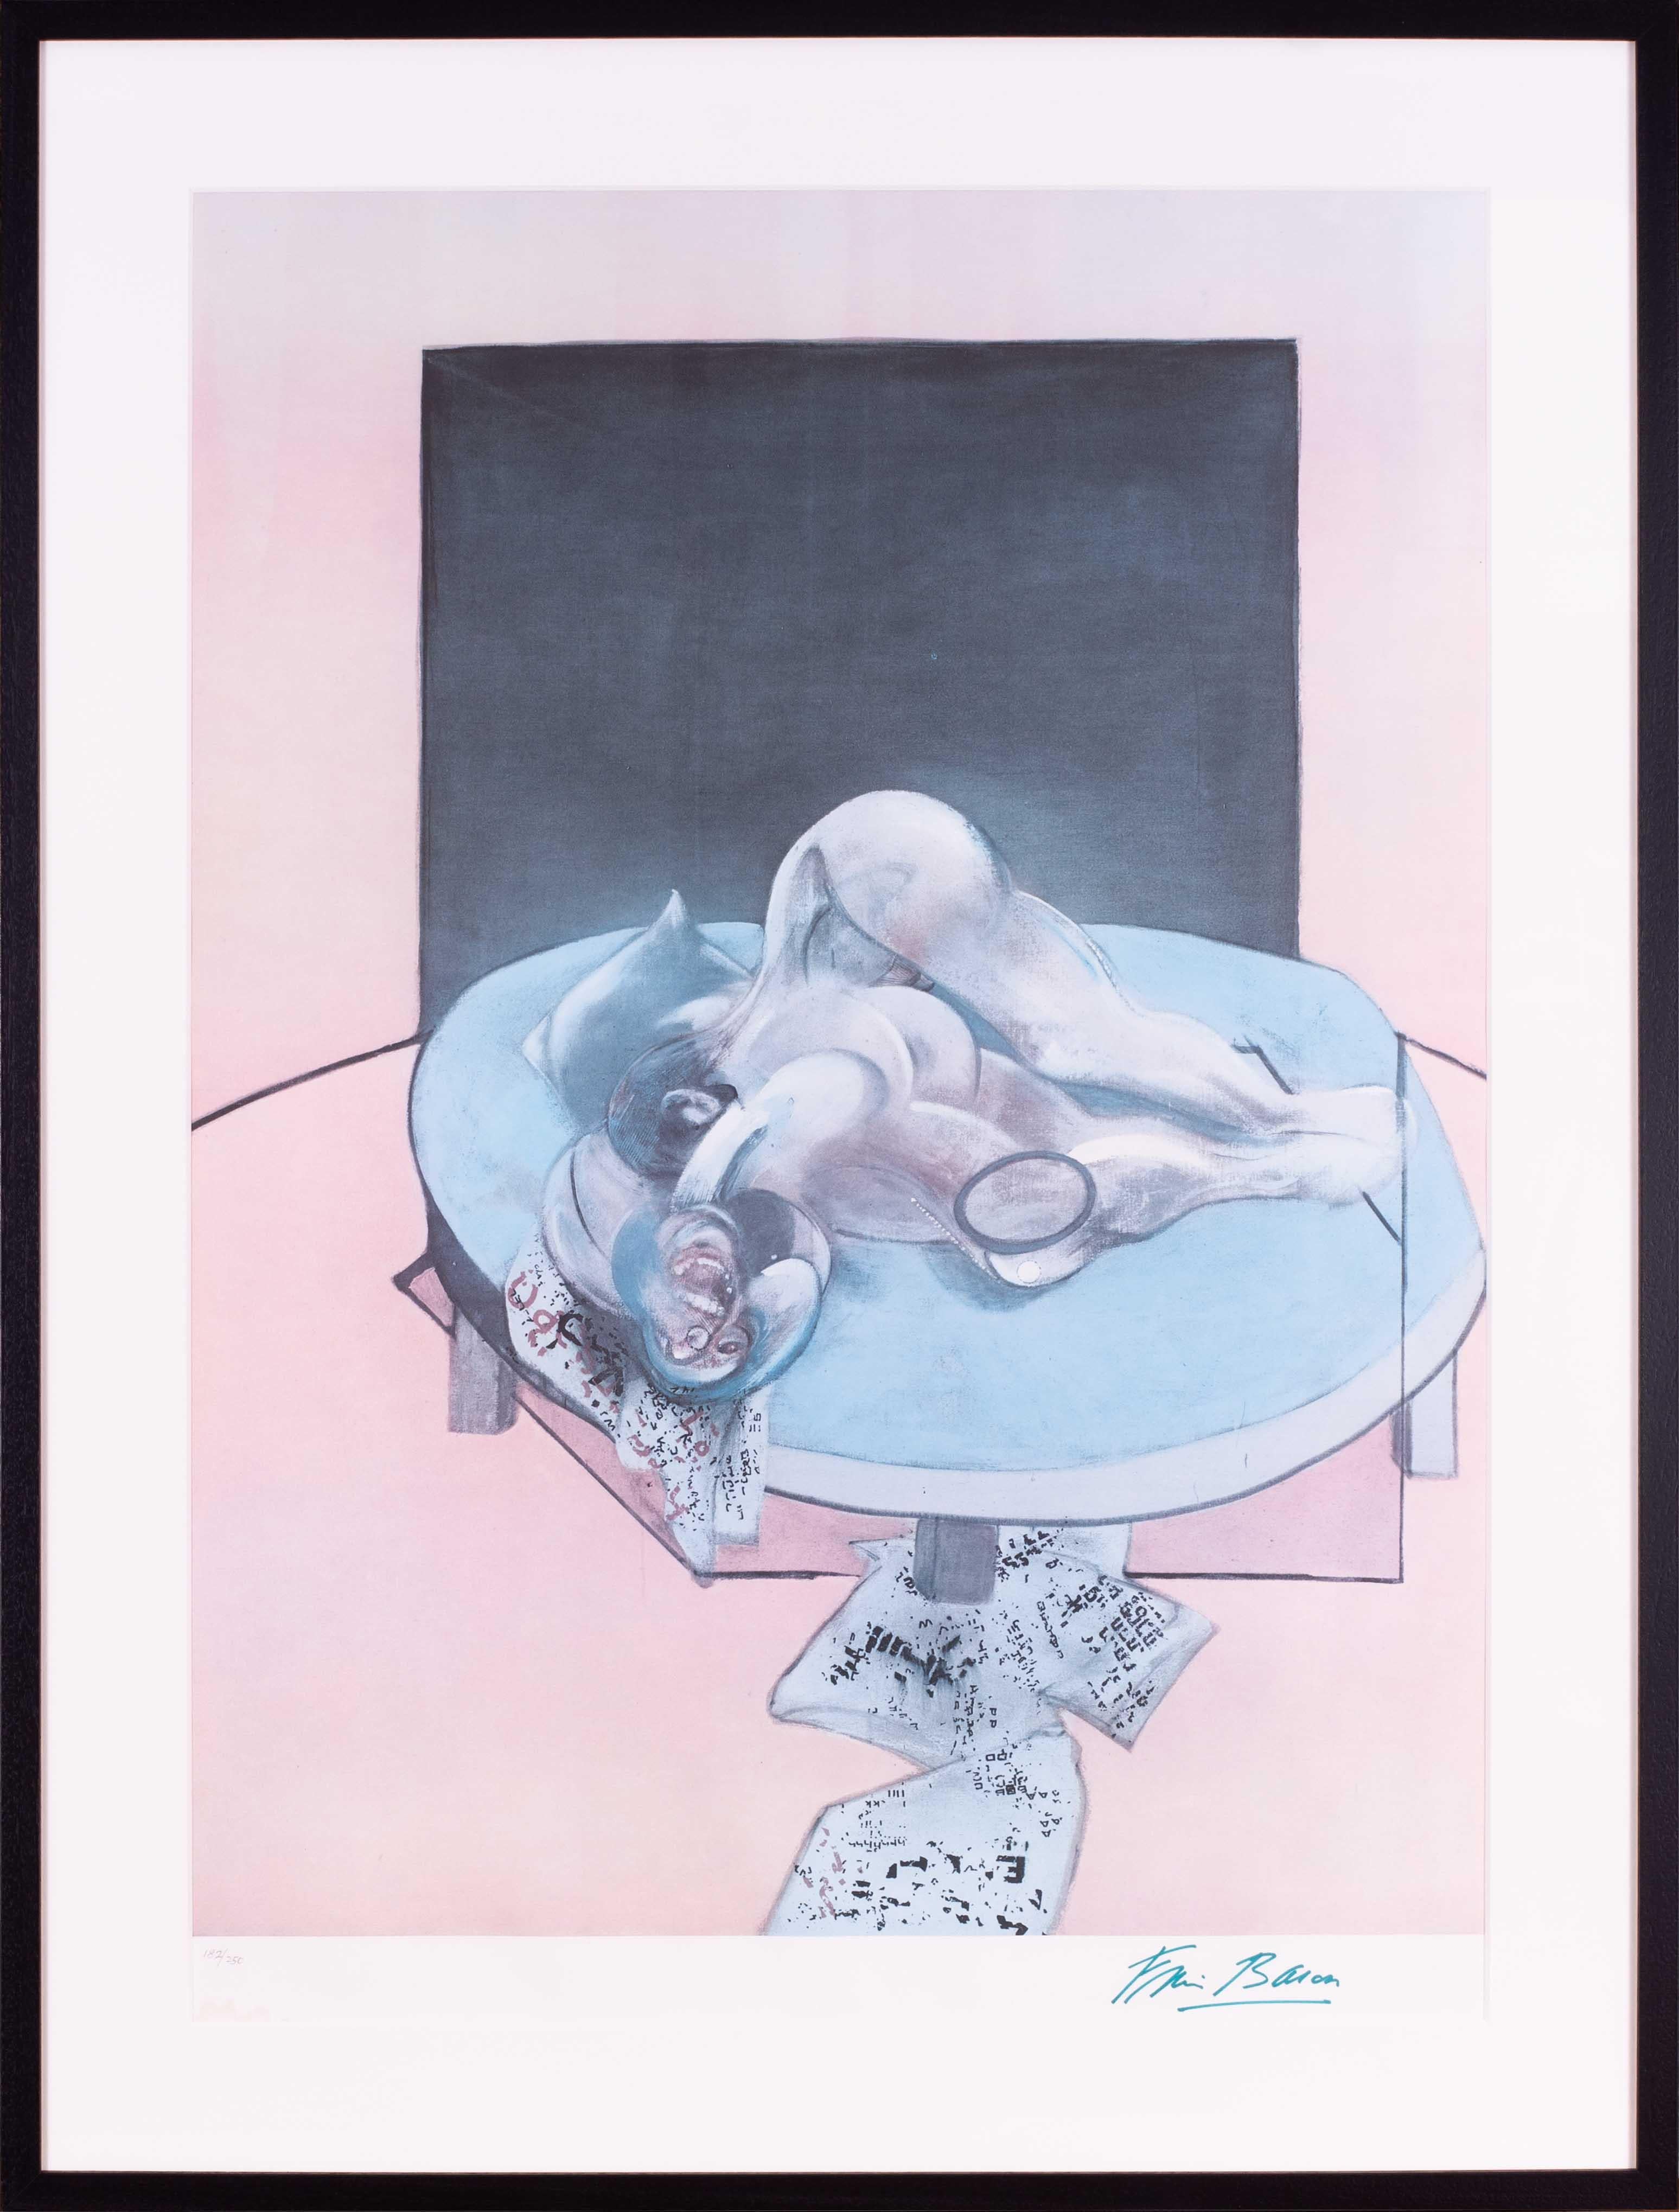 Rare, striking signed Francis Bacon lithograph from 1980, number 182 / 250. 

Details of the work are as follows:

Francis Bacon (irish, 1909 – 1992)
Studies of the Human body, 1980
Offset lithograph in colours
Signed ‘Francis Bacon’ (lower right)